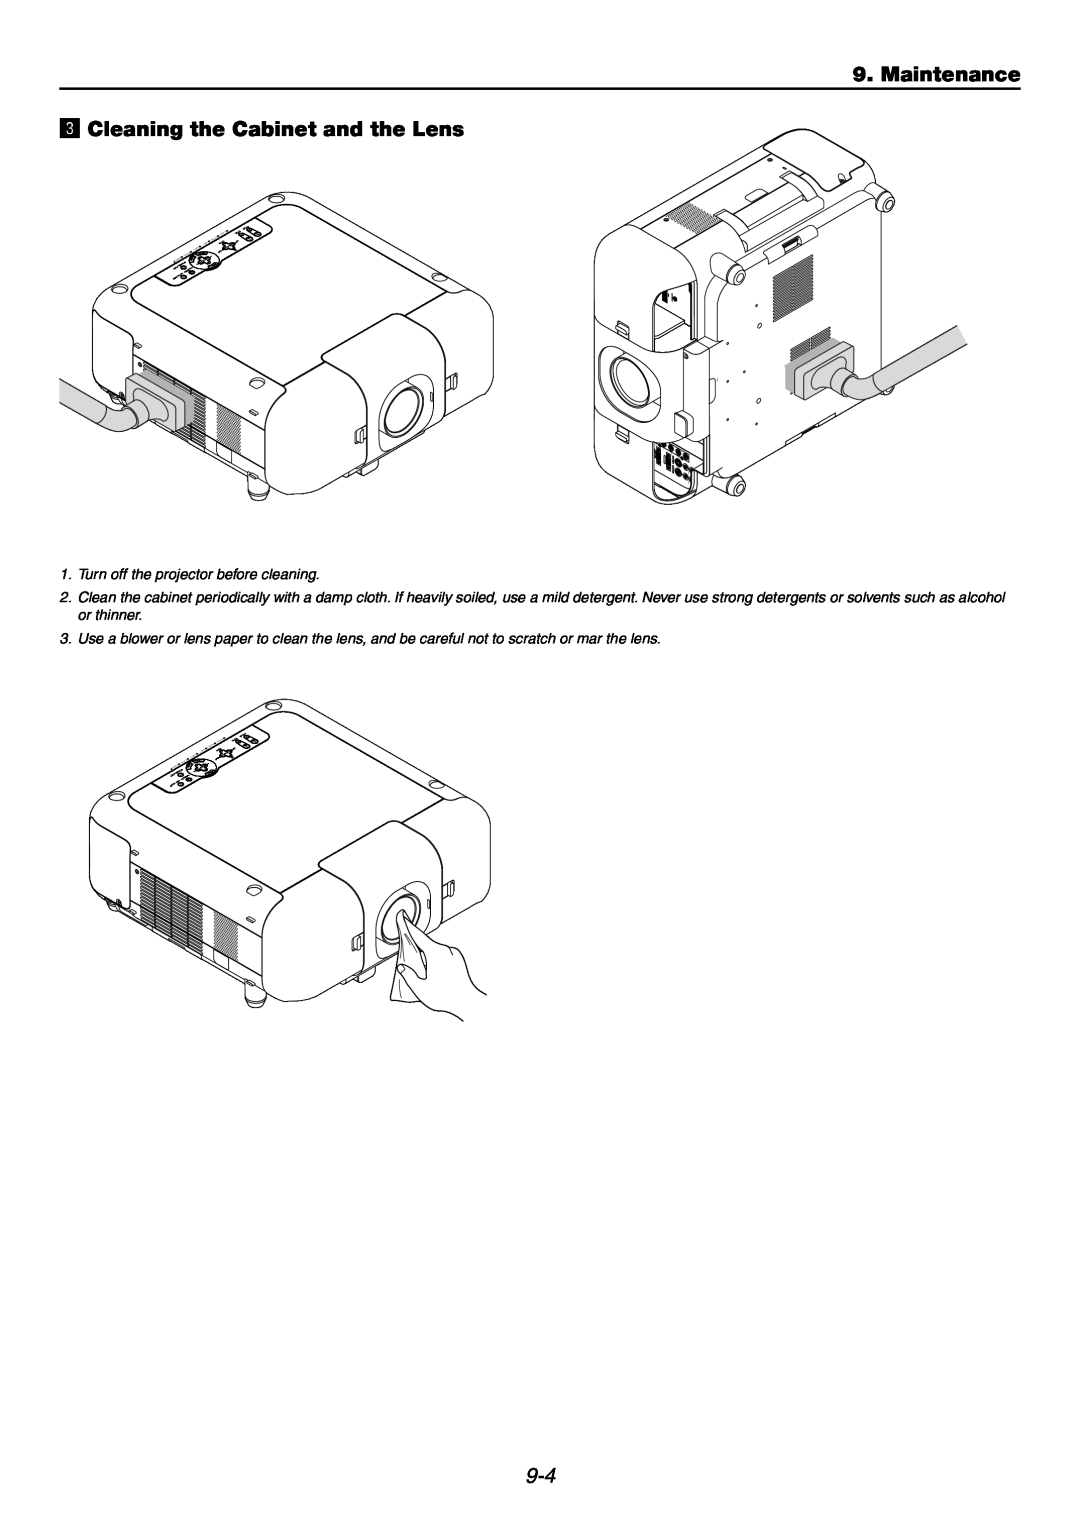 NEC GT6000 user manual Maintenance, c Cleaning the Cabinet and the Lens 